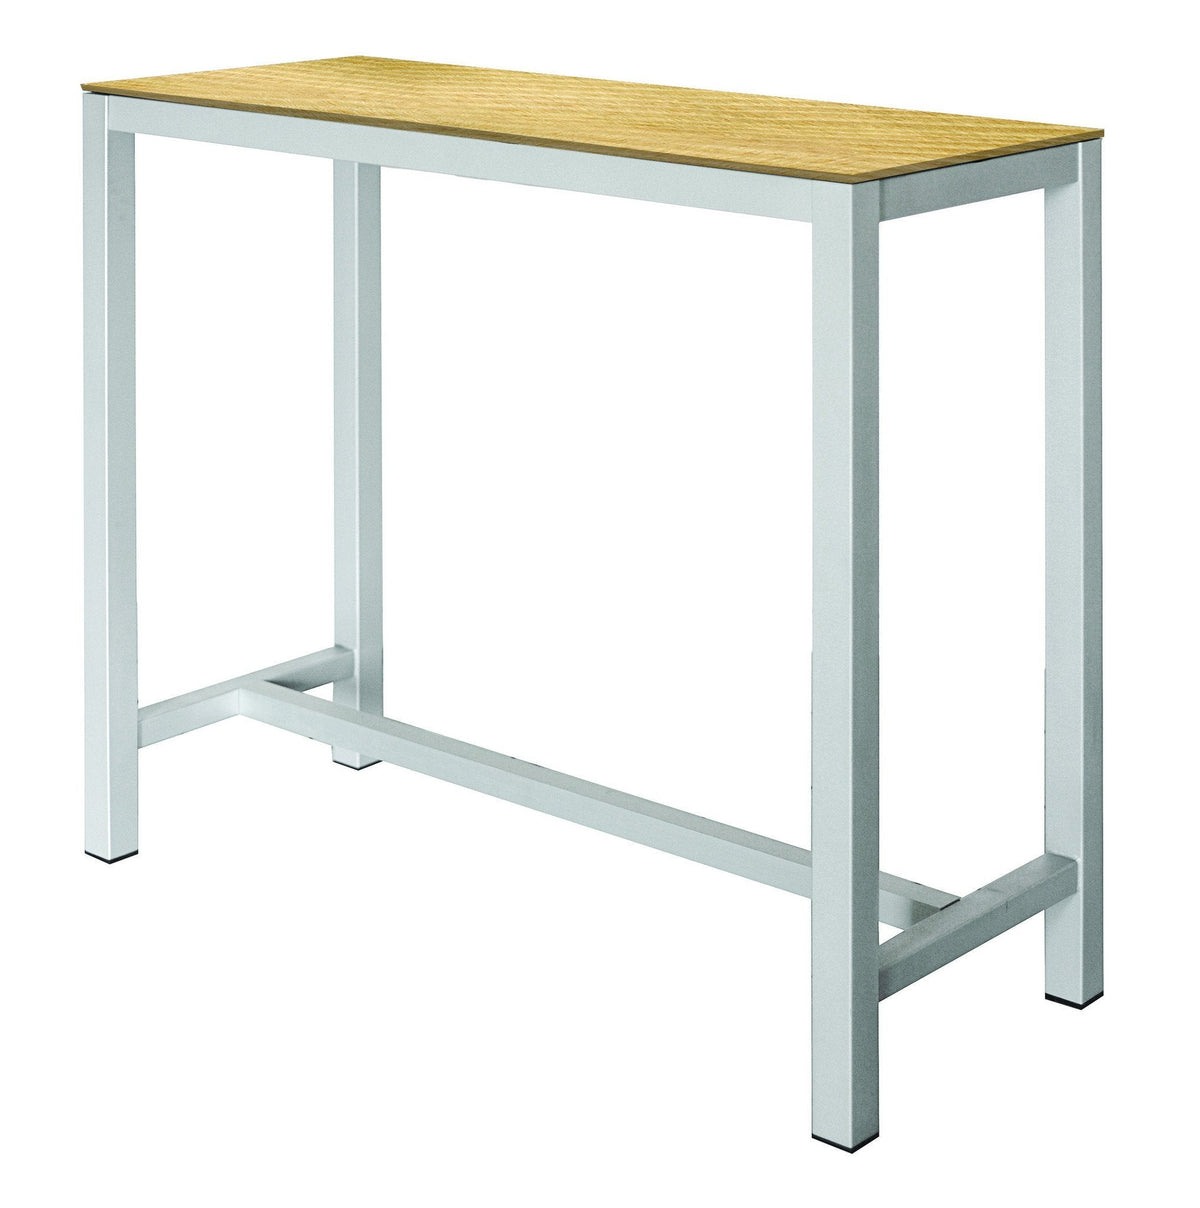 Banket Poseur Table-Gaber-Contract Furniture Store